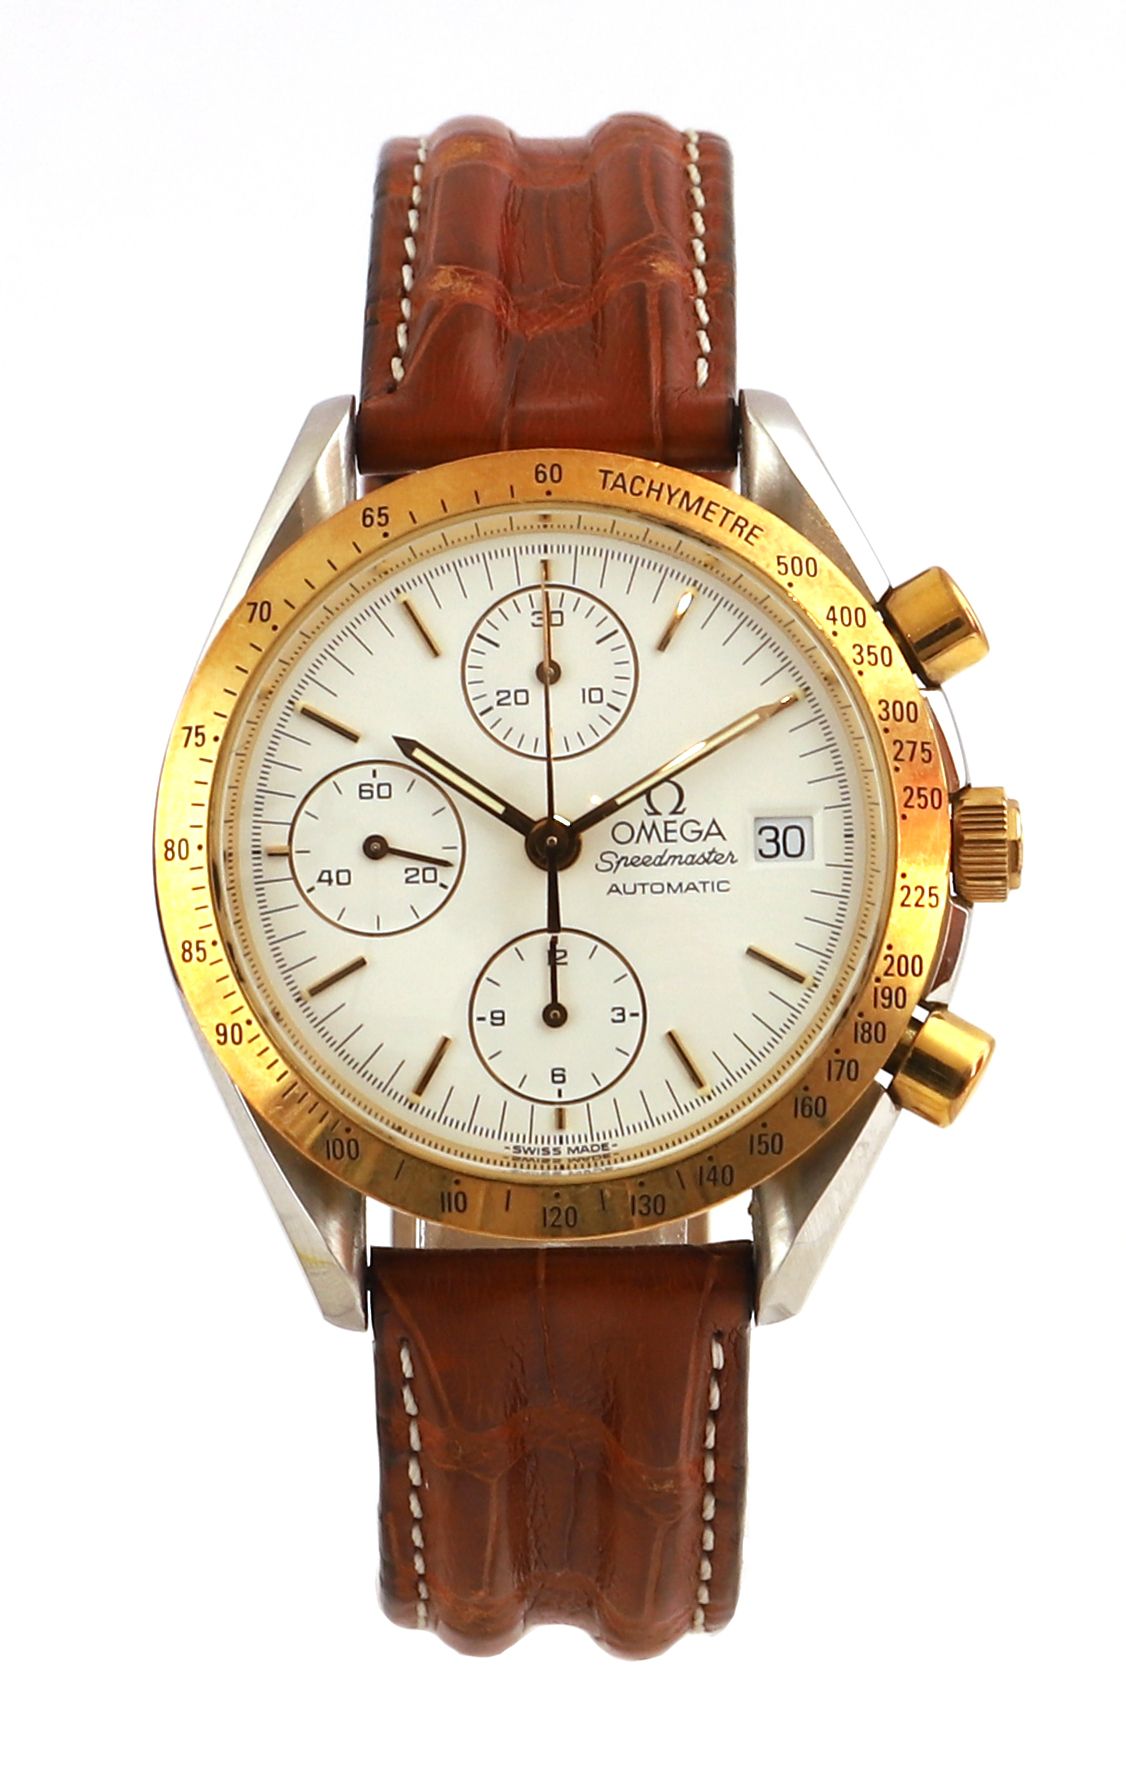 Null OMEGA Speedmaster About 2000

N° 54266756

Men's gold and steel chronograph&hellip;